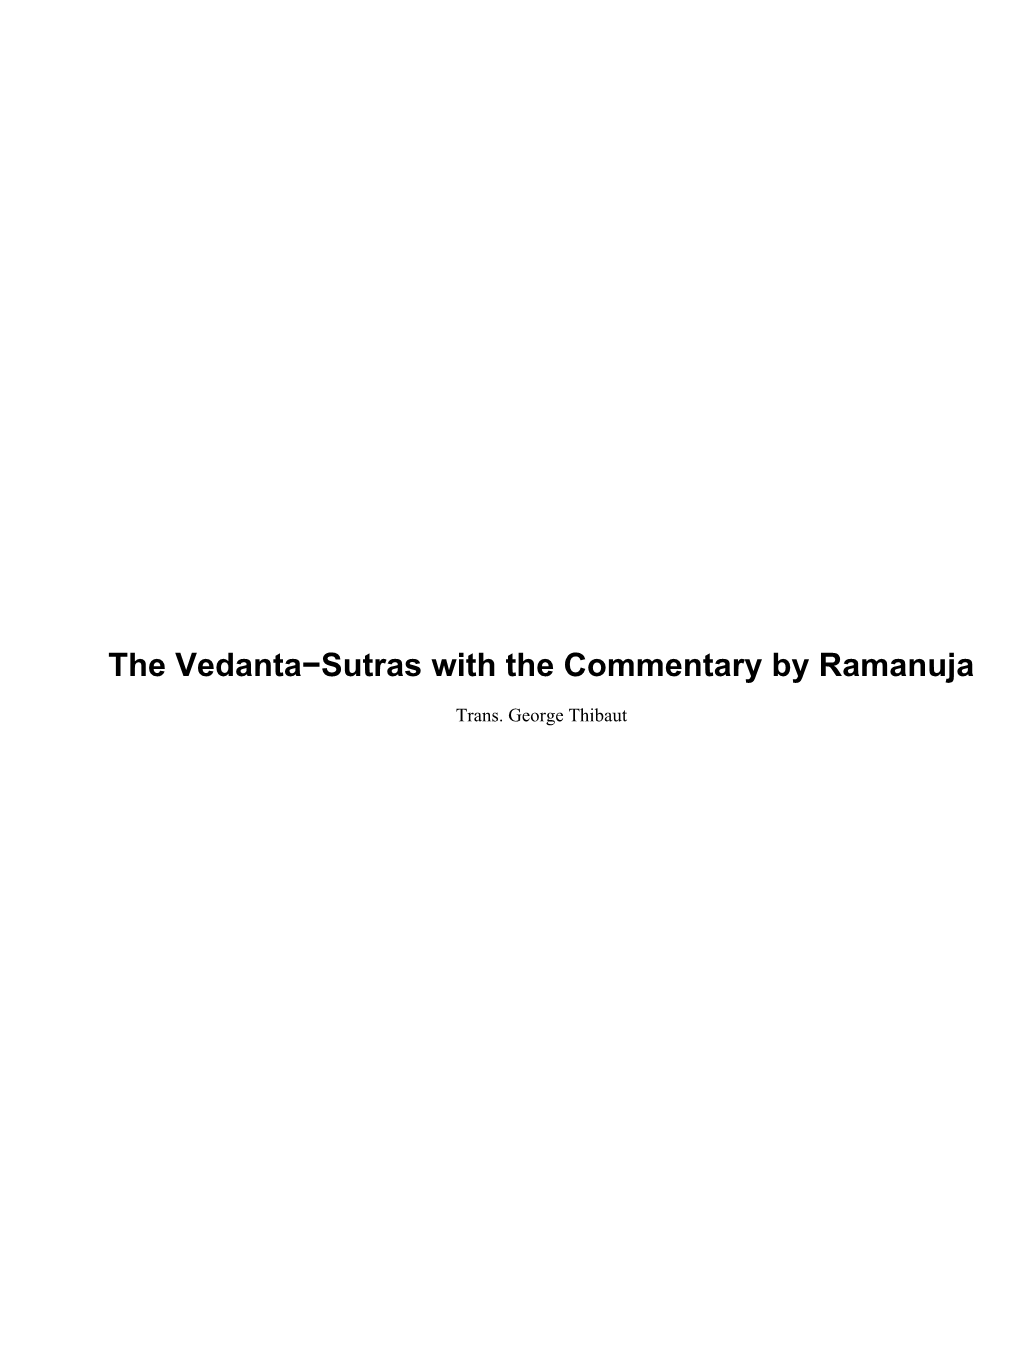 The Vedanta-Sutras with the Commentary by Ramanuja